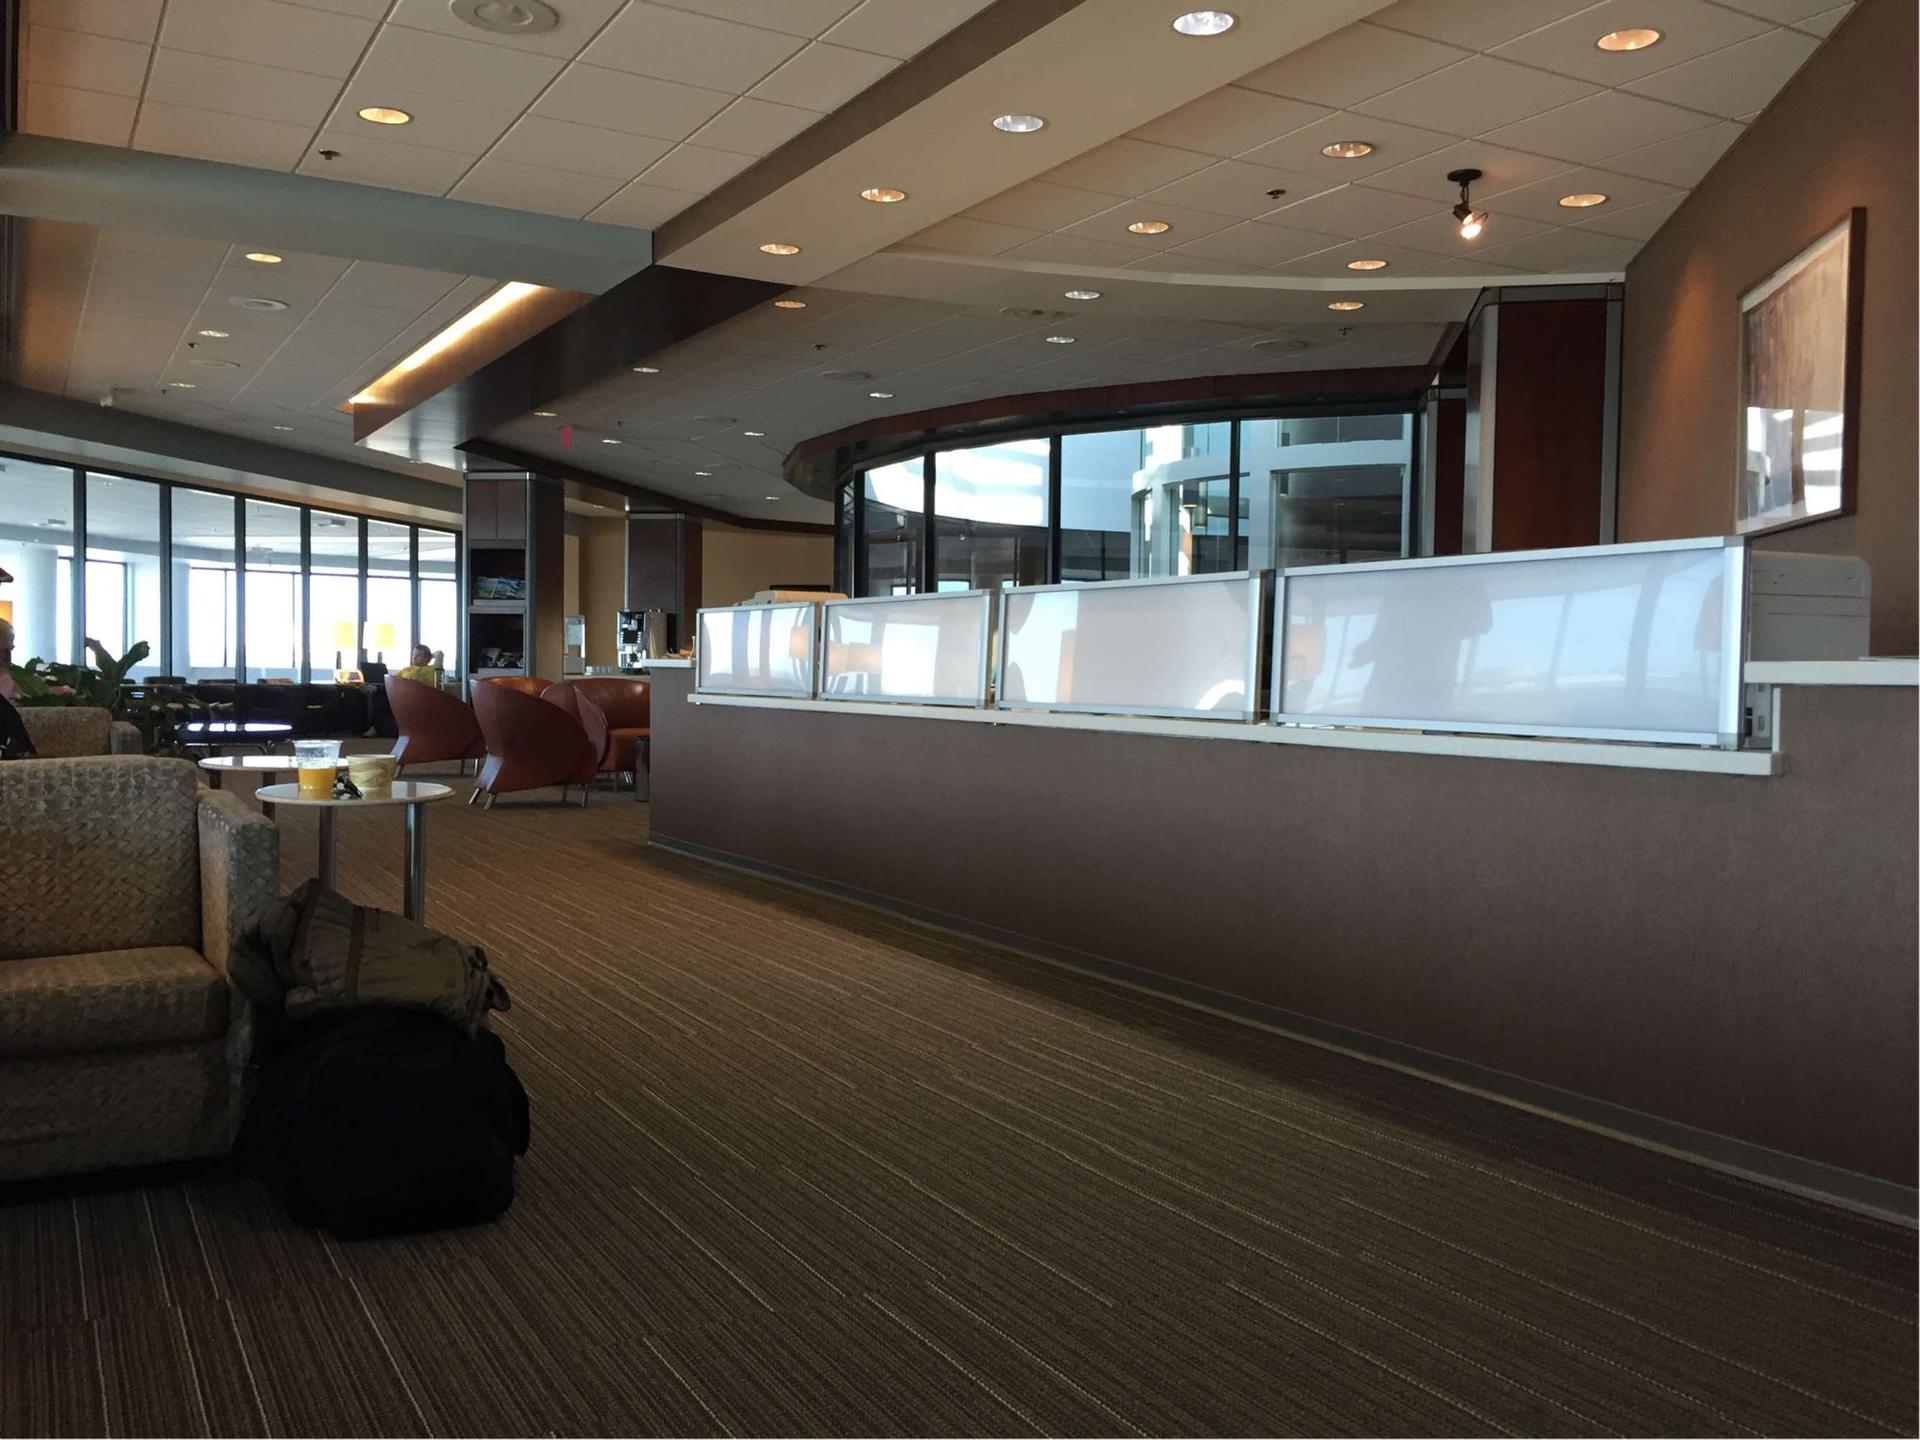 American Airlines Admirals Club image 10 of 16